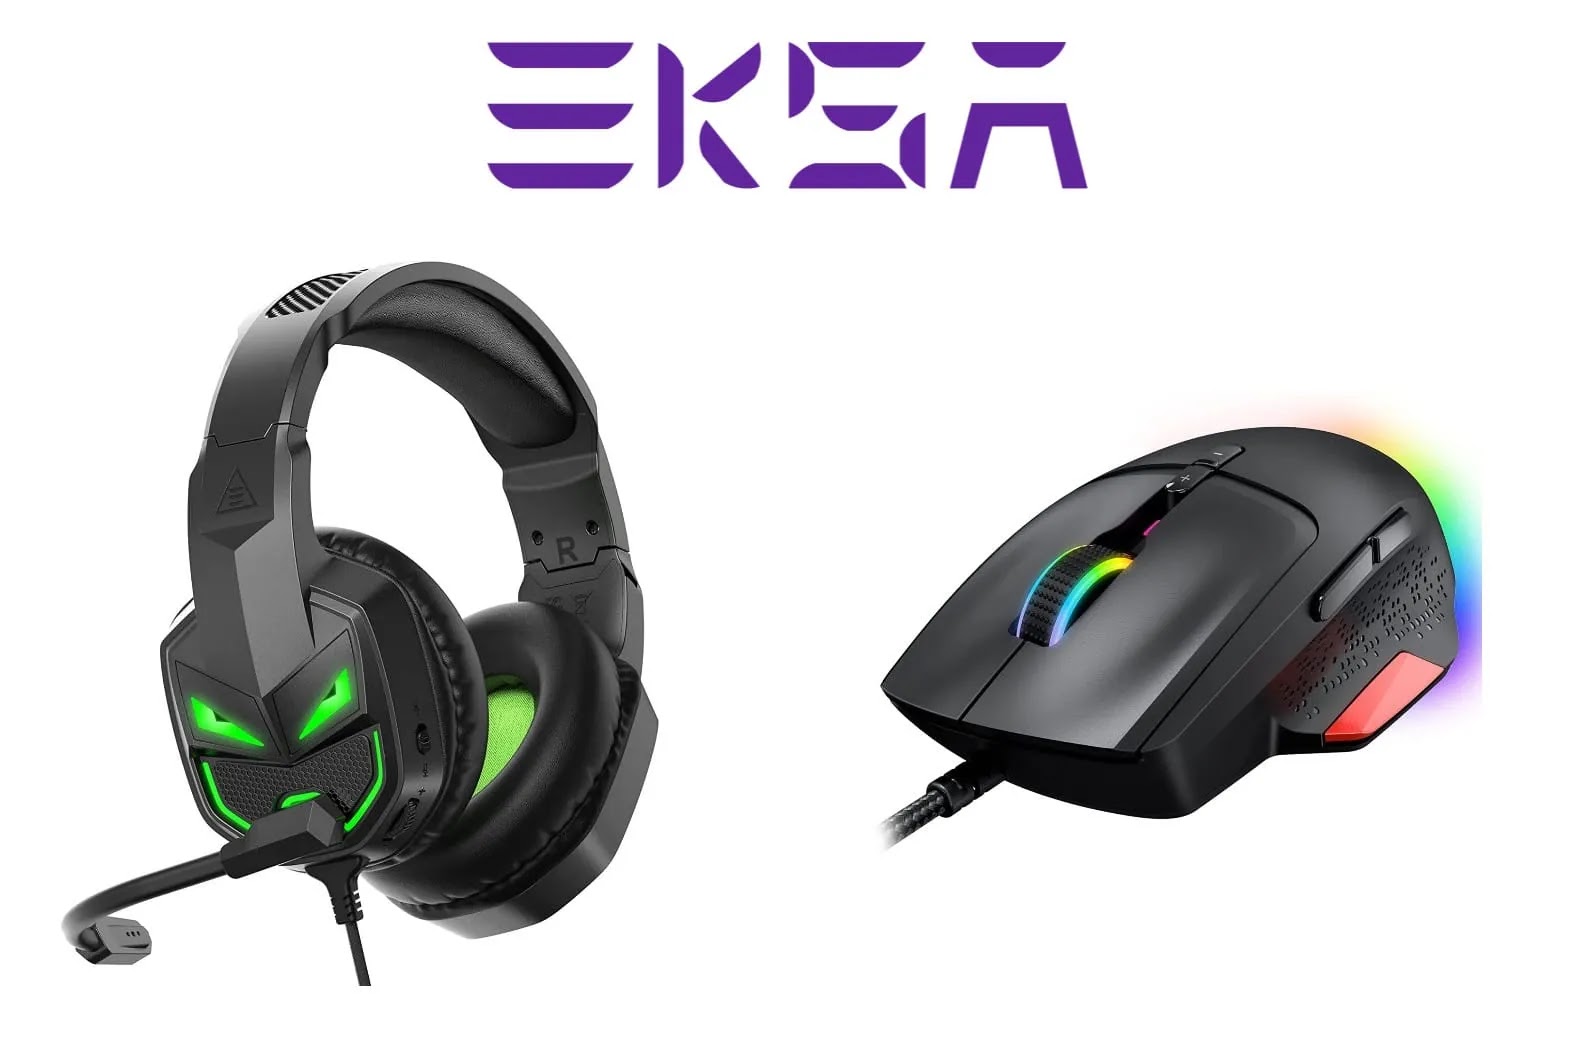 EKSA launches its Fenrir E7000 Gaming Headset and EM600 RGB Advanced PC Gaming Mouse for the ultimate gaming setup